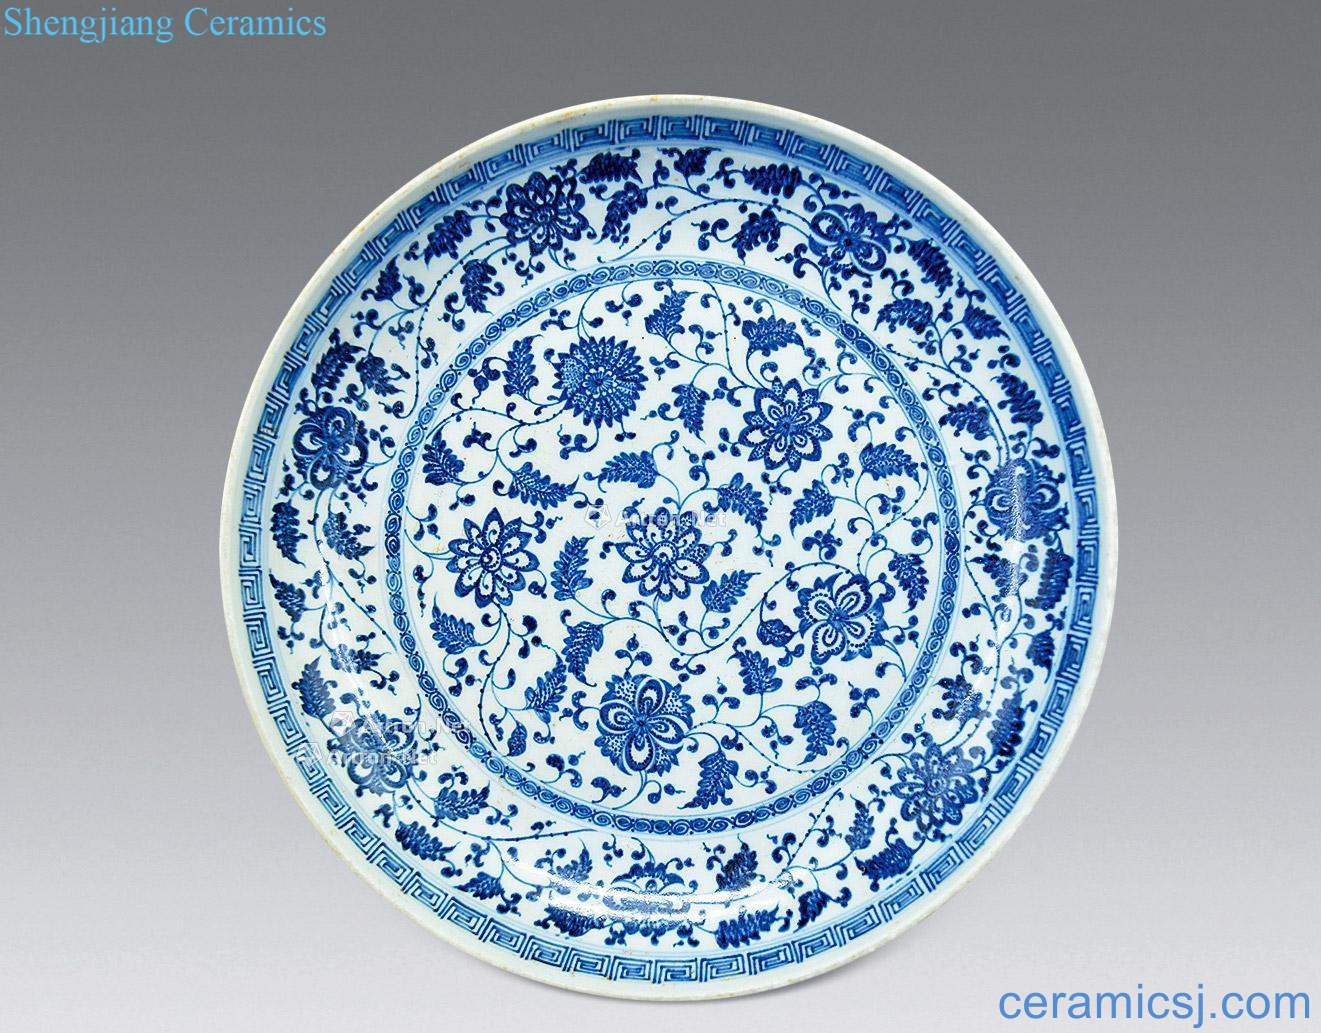 Ming Blue and white ruffled lotus flower pattern plate